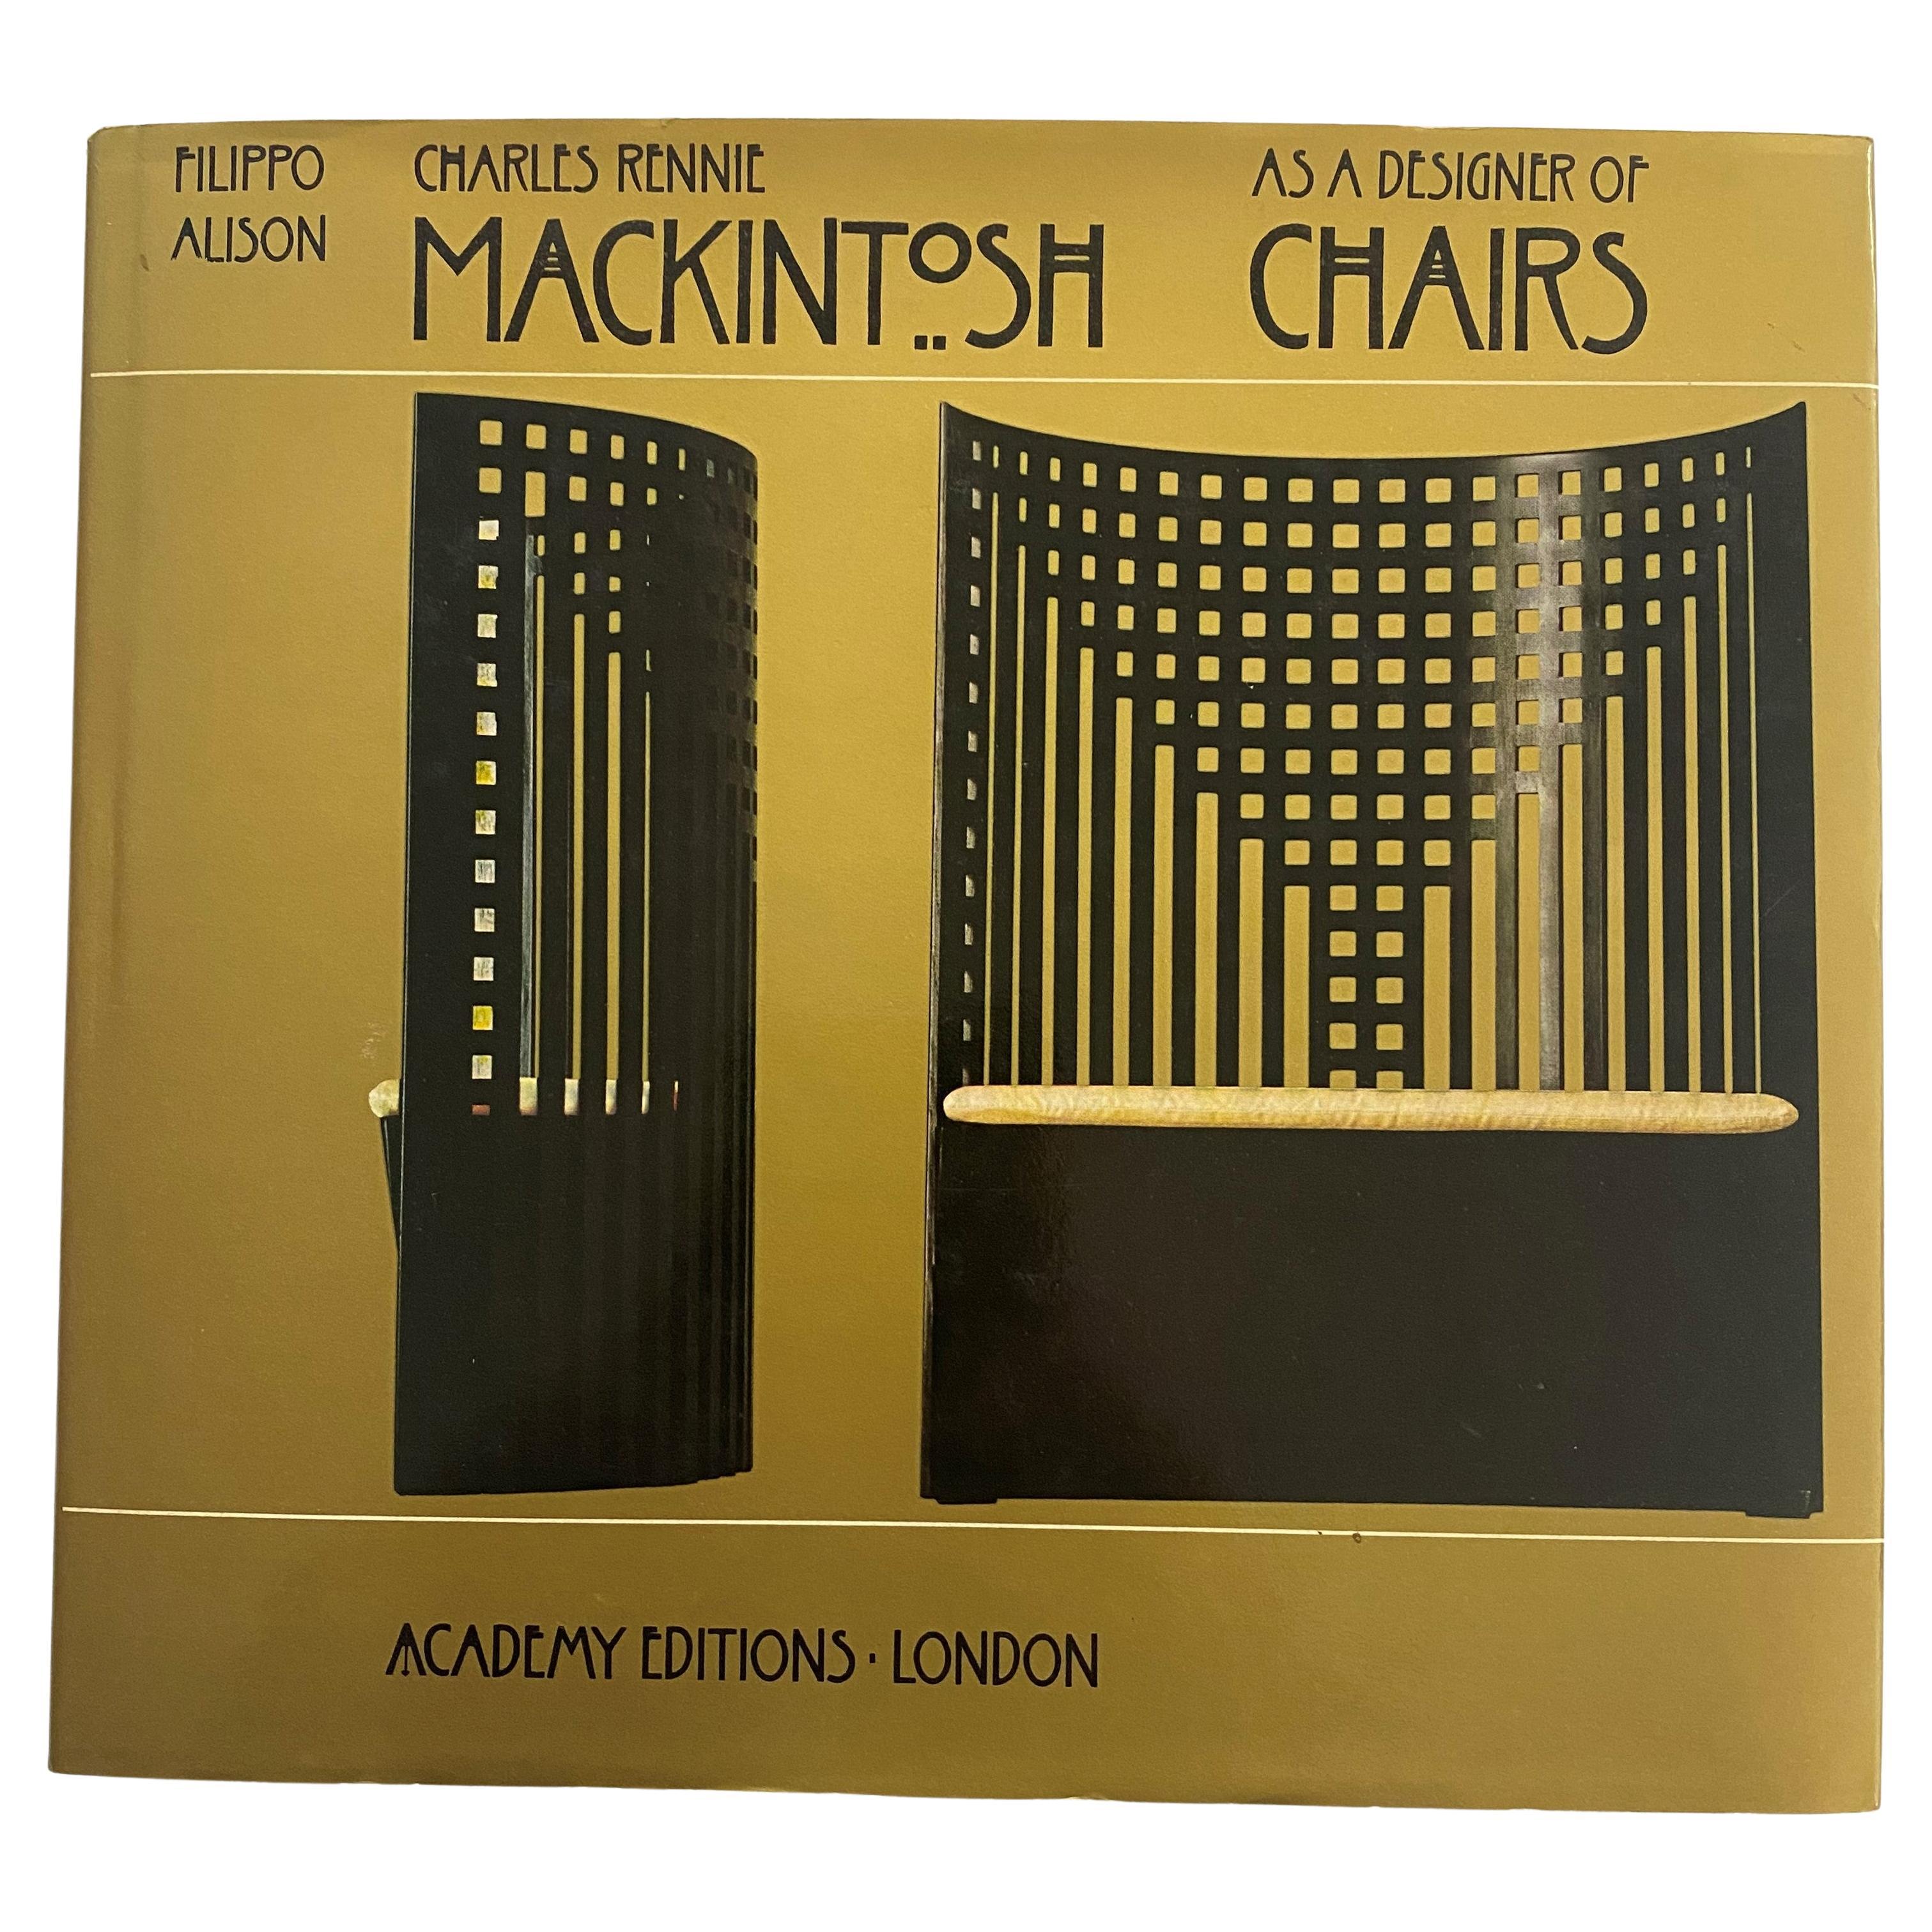 Charles Rennie Mackintosh as a Designer of Chairs by Filippo Alison (Book)